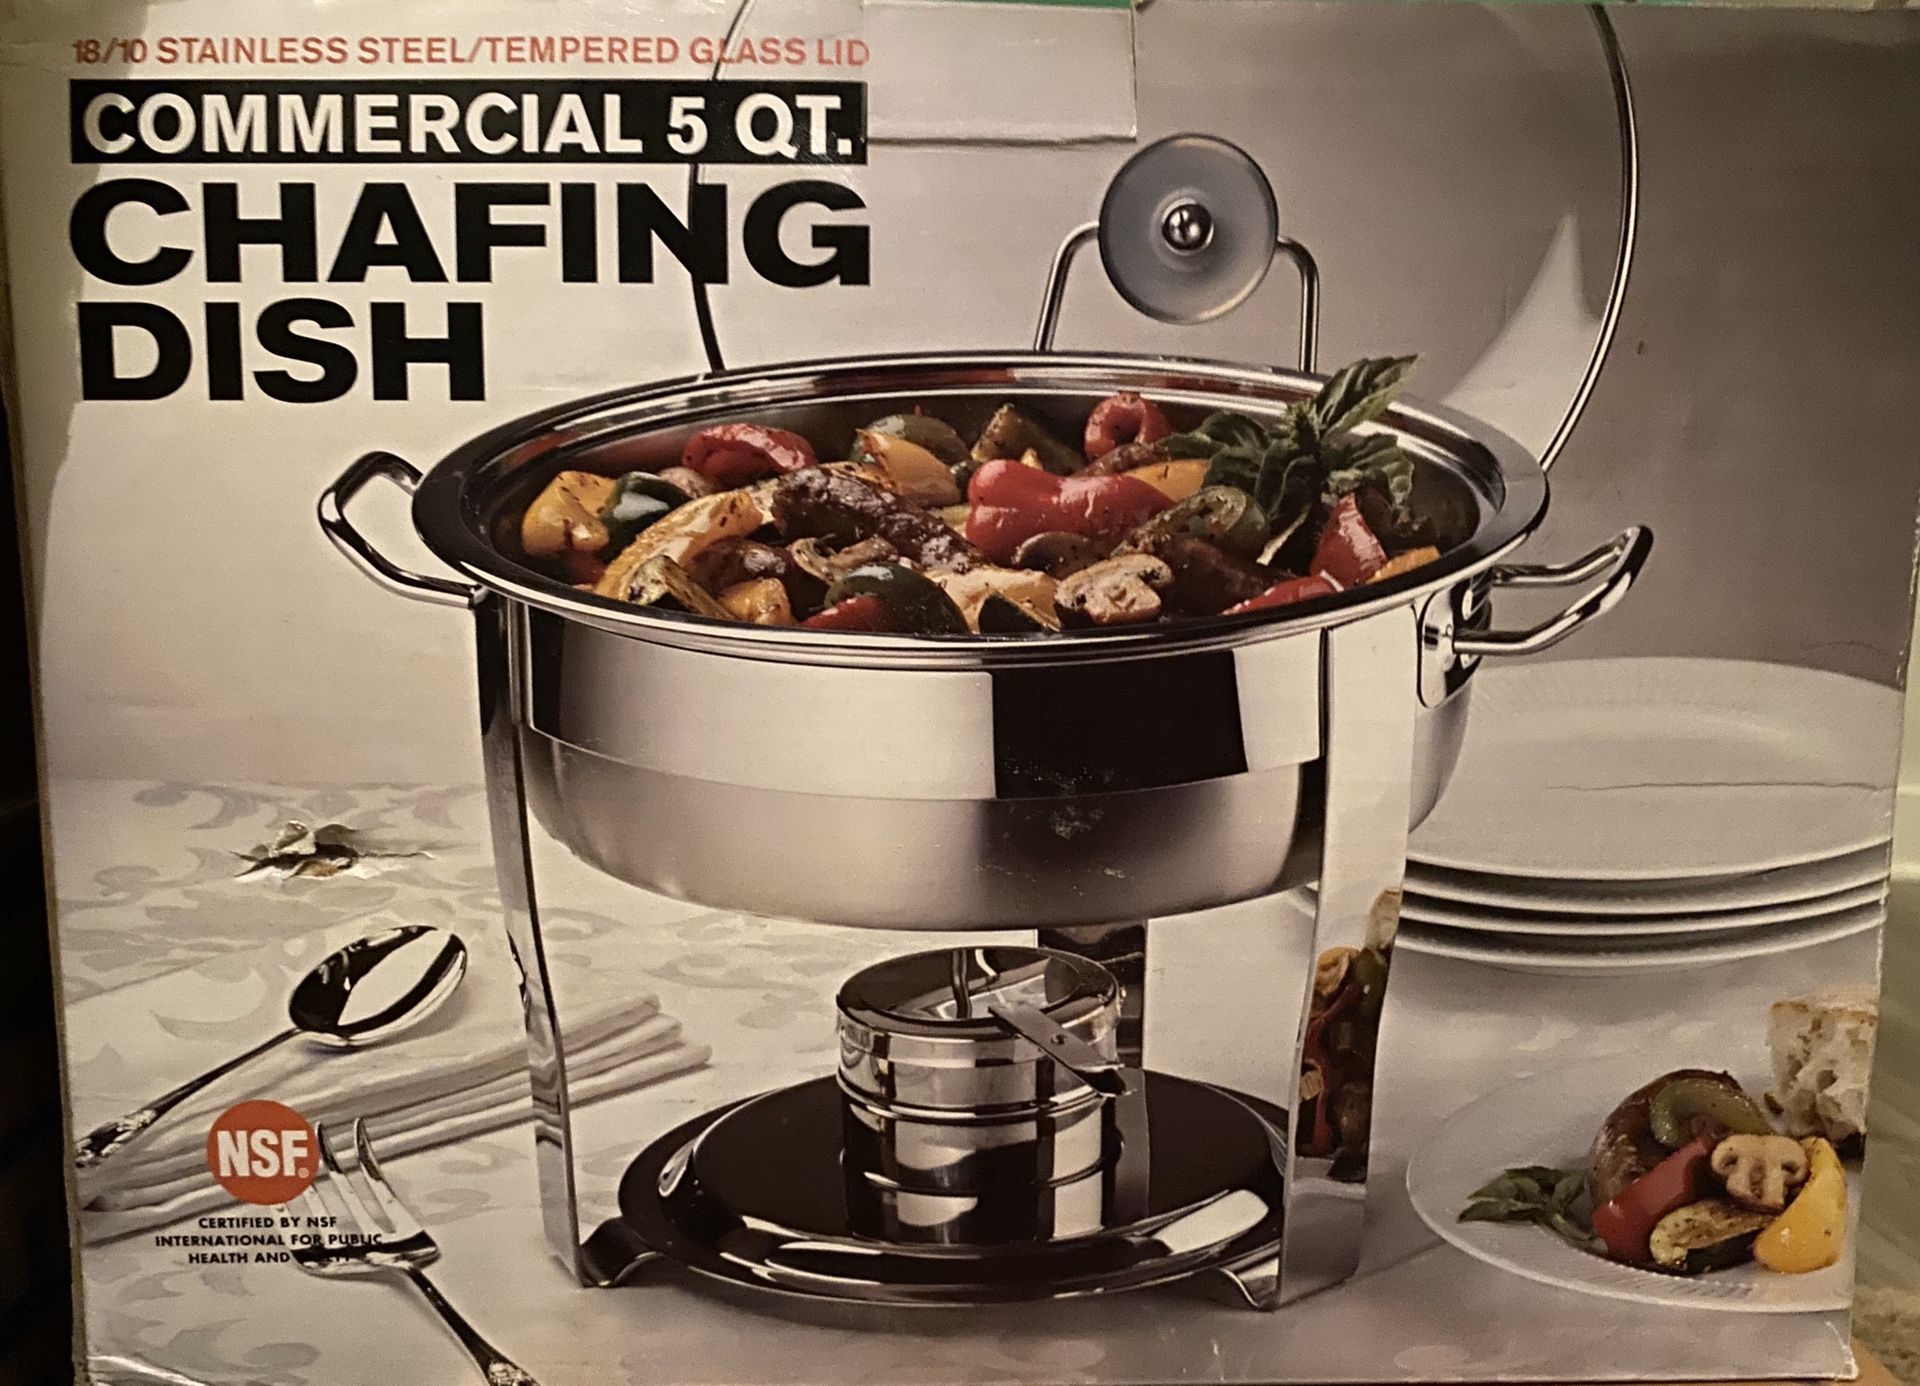 Serving or chafing dish 5 qt.